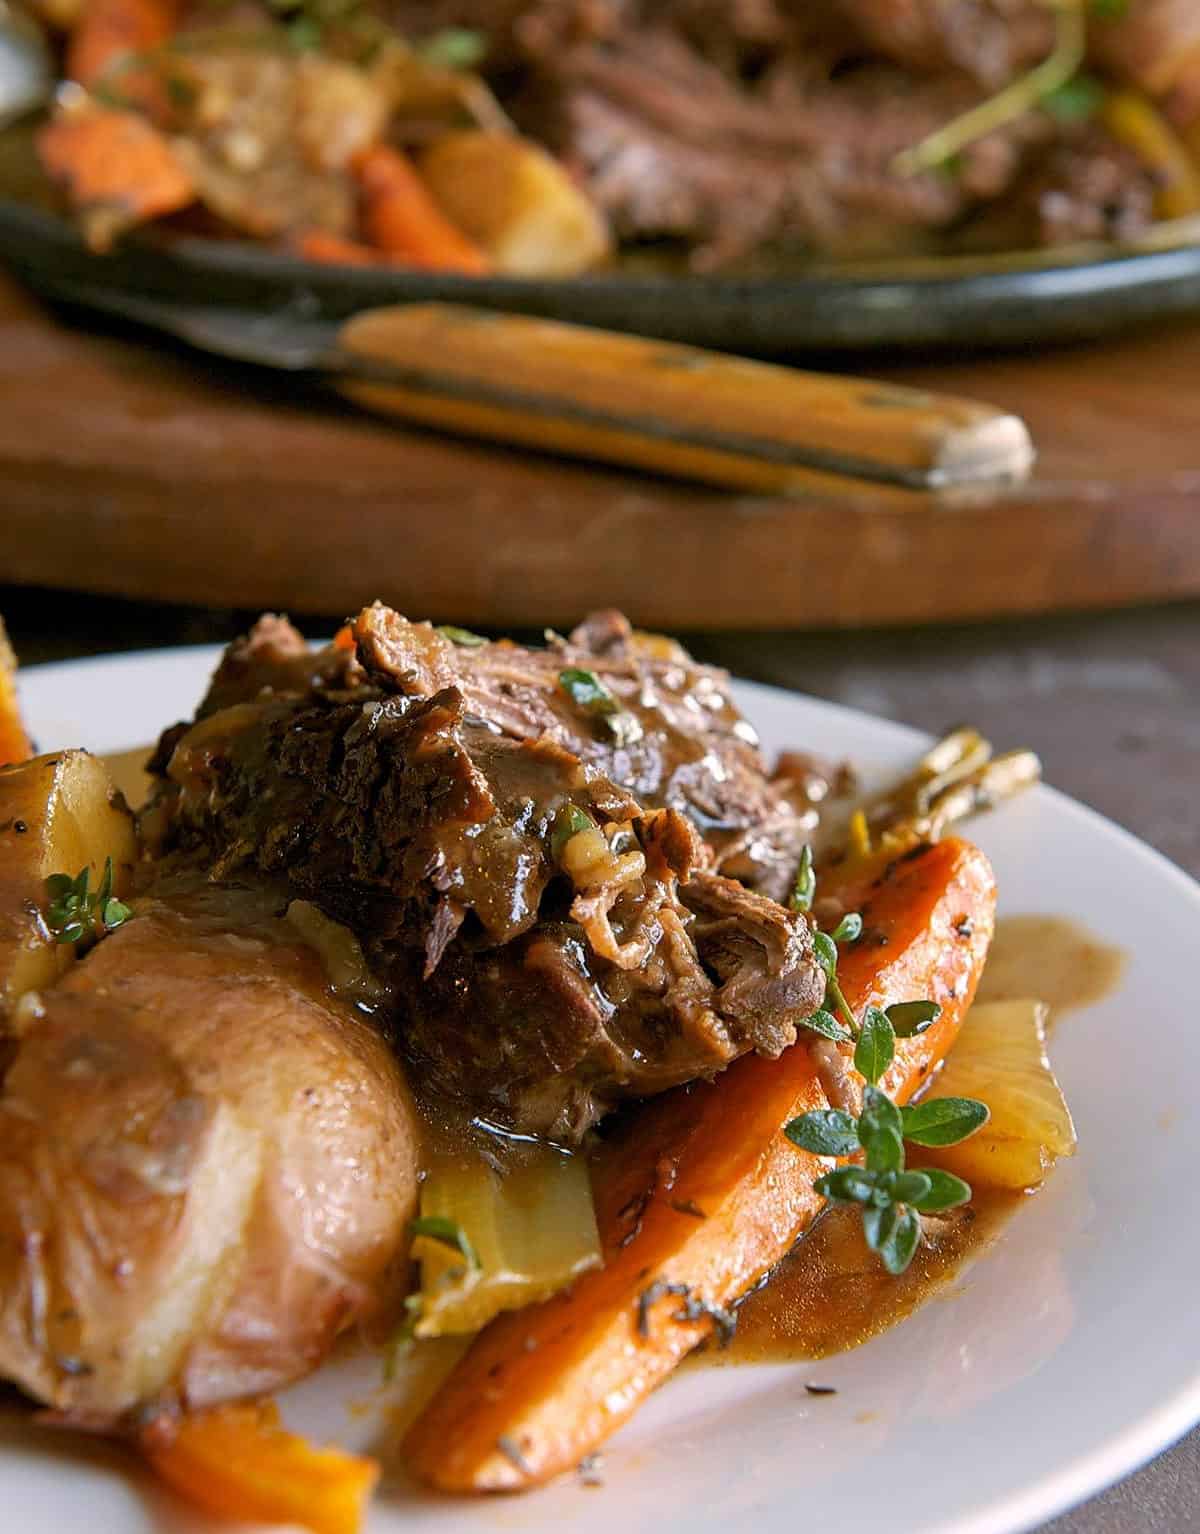  A hearty pot roast fit for any gathering